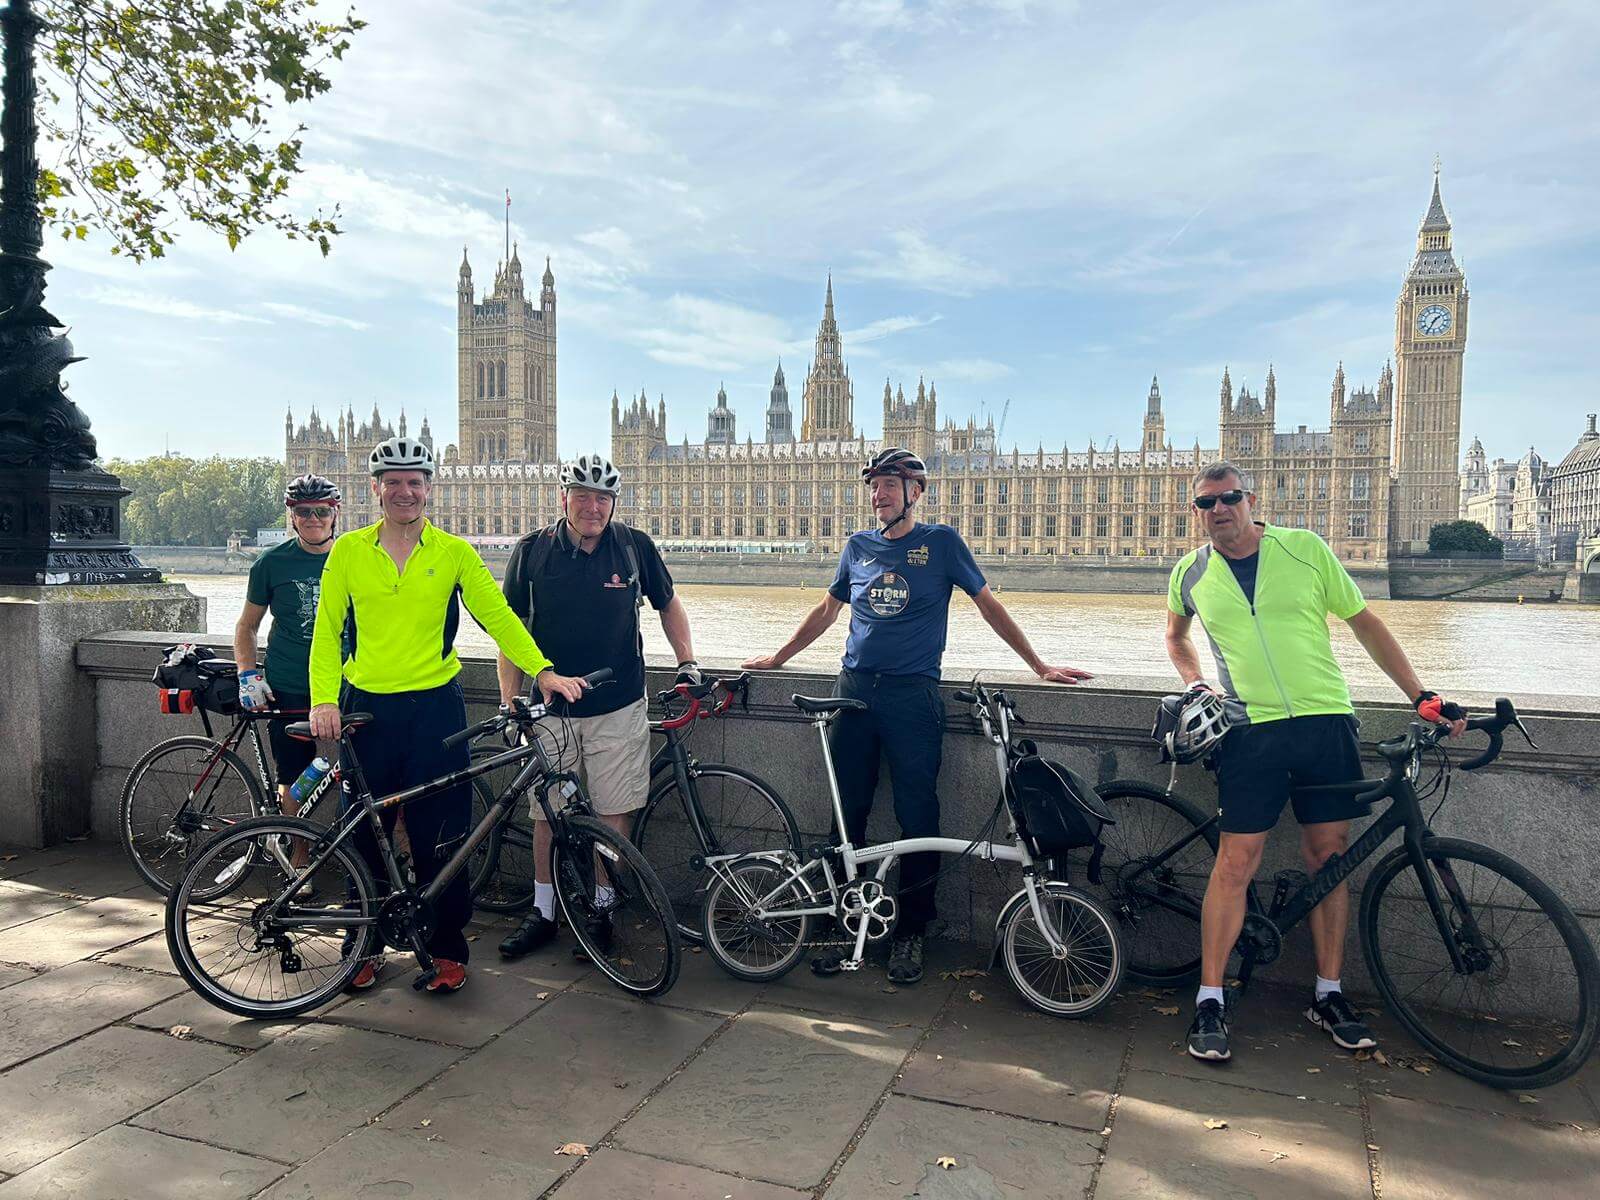 Cyclists stop to admire the view of Palace of Westminster along the Thames.